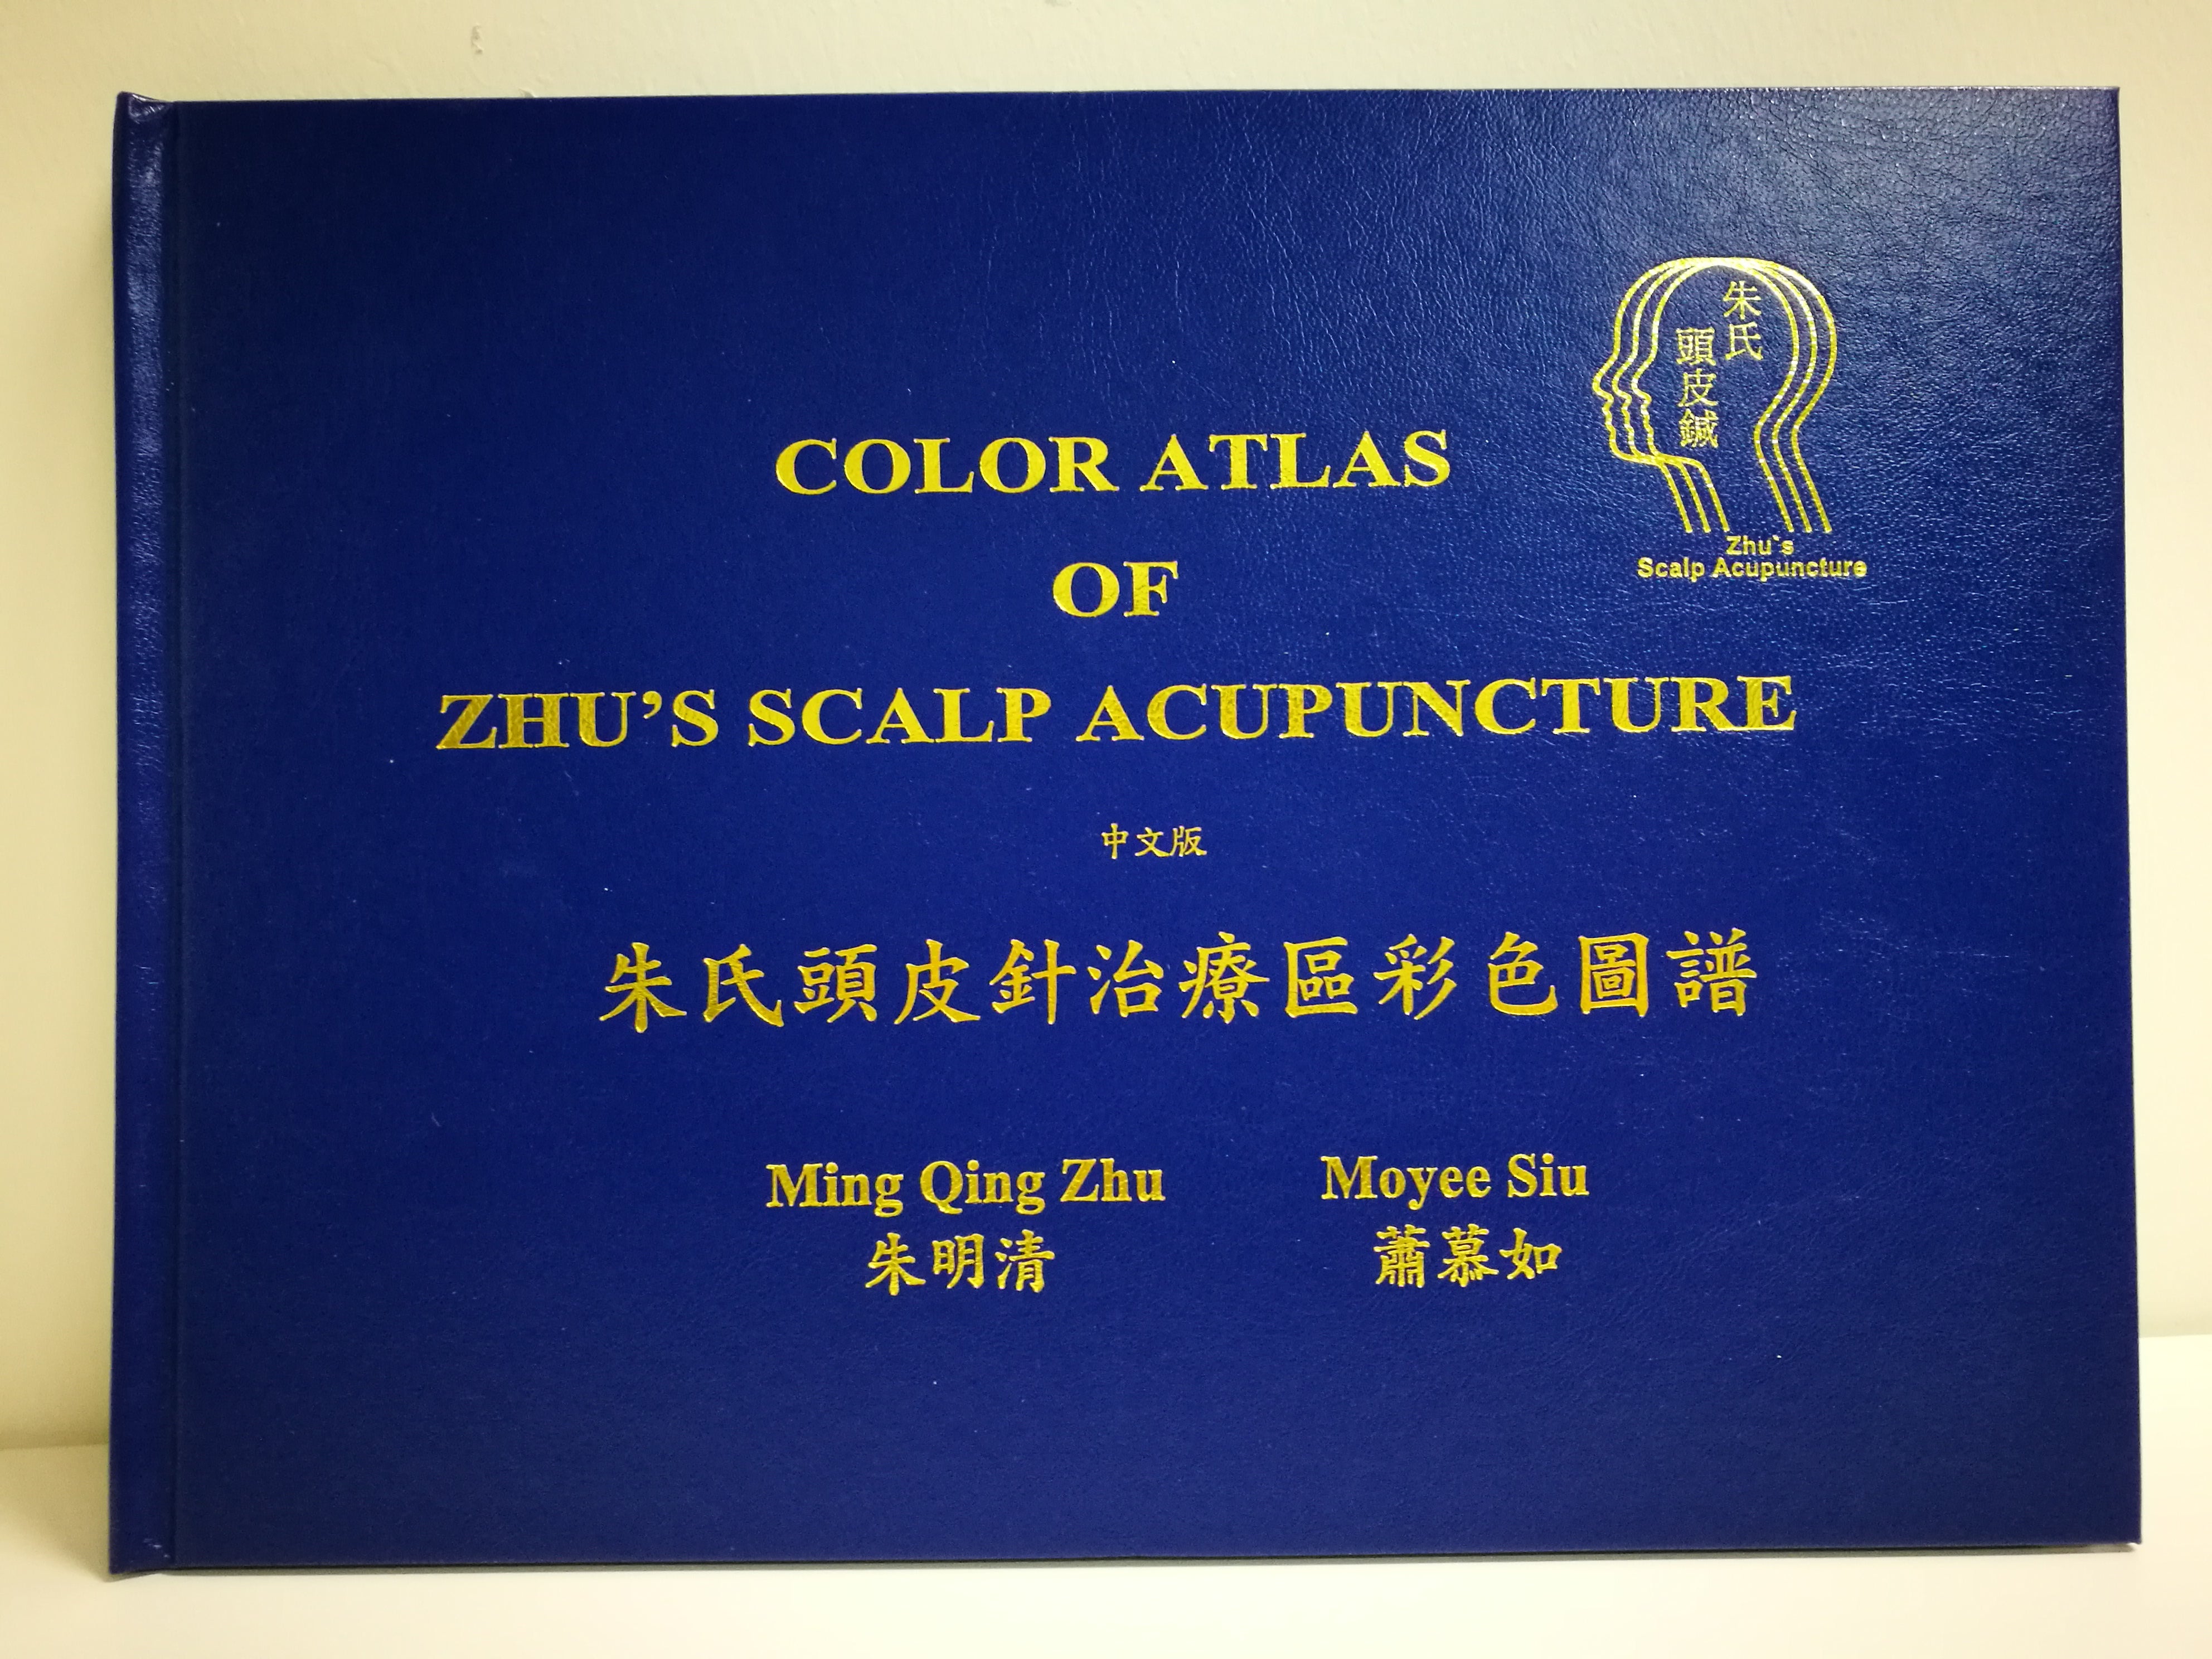 Colour Atlas of Zhu's Scalp Acupuncture Chinese Edition (Hardcover)